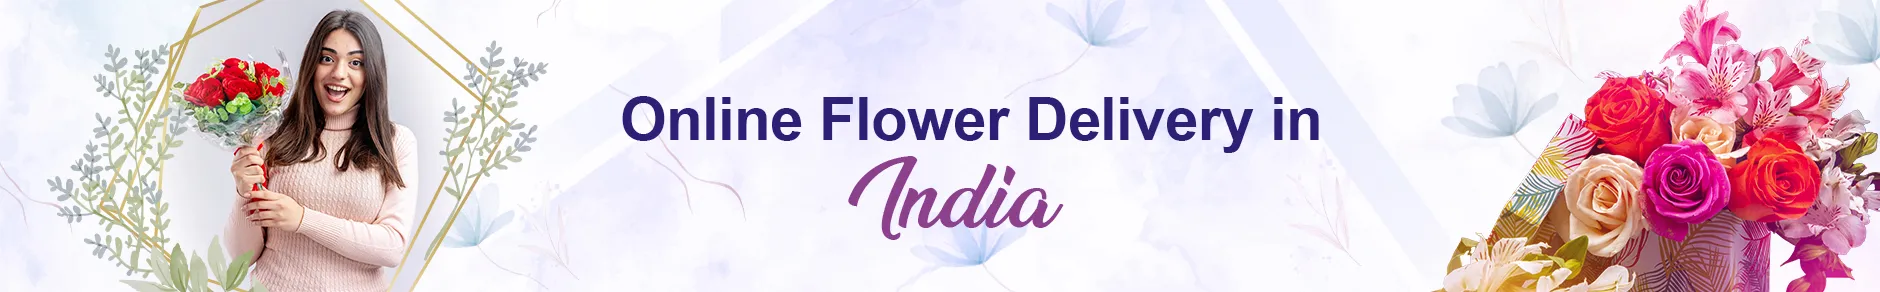 Online Flower Delivery in India in 4 hours - Free Shipping